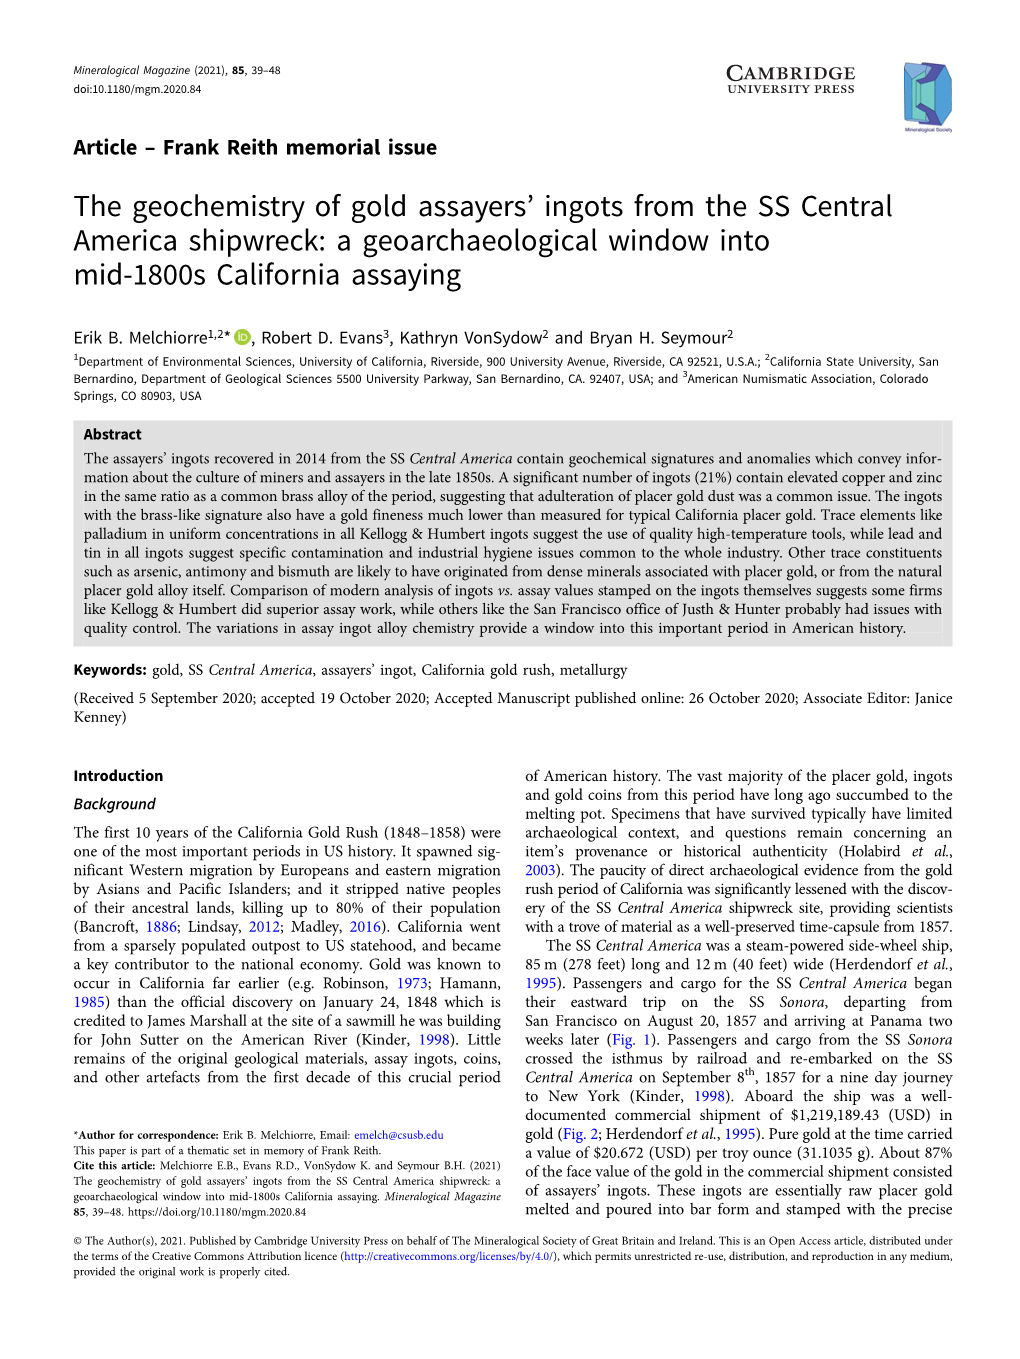 The Geochemistry of Gold Assayers' Ingots from the SS Central America